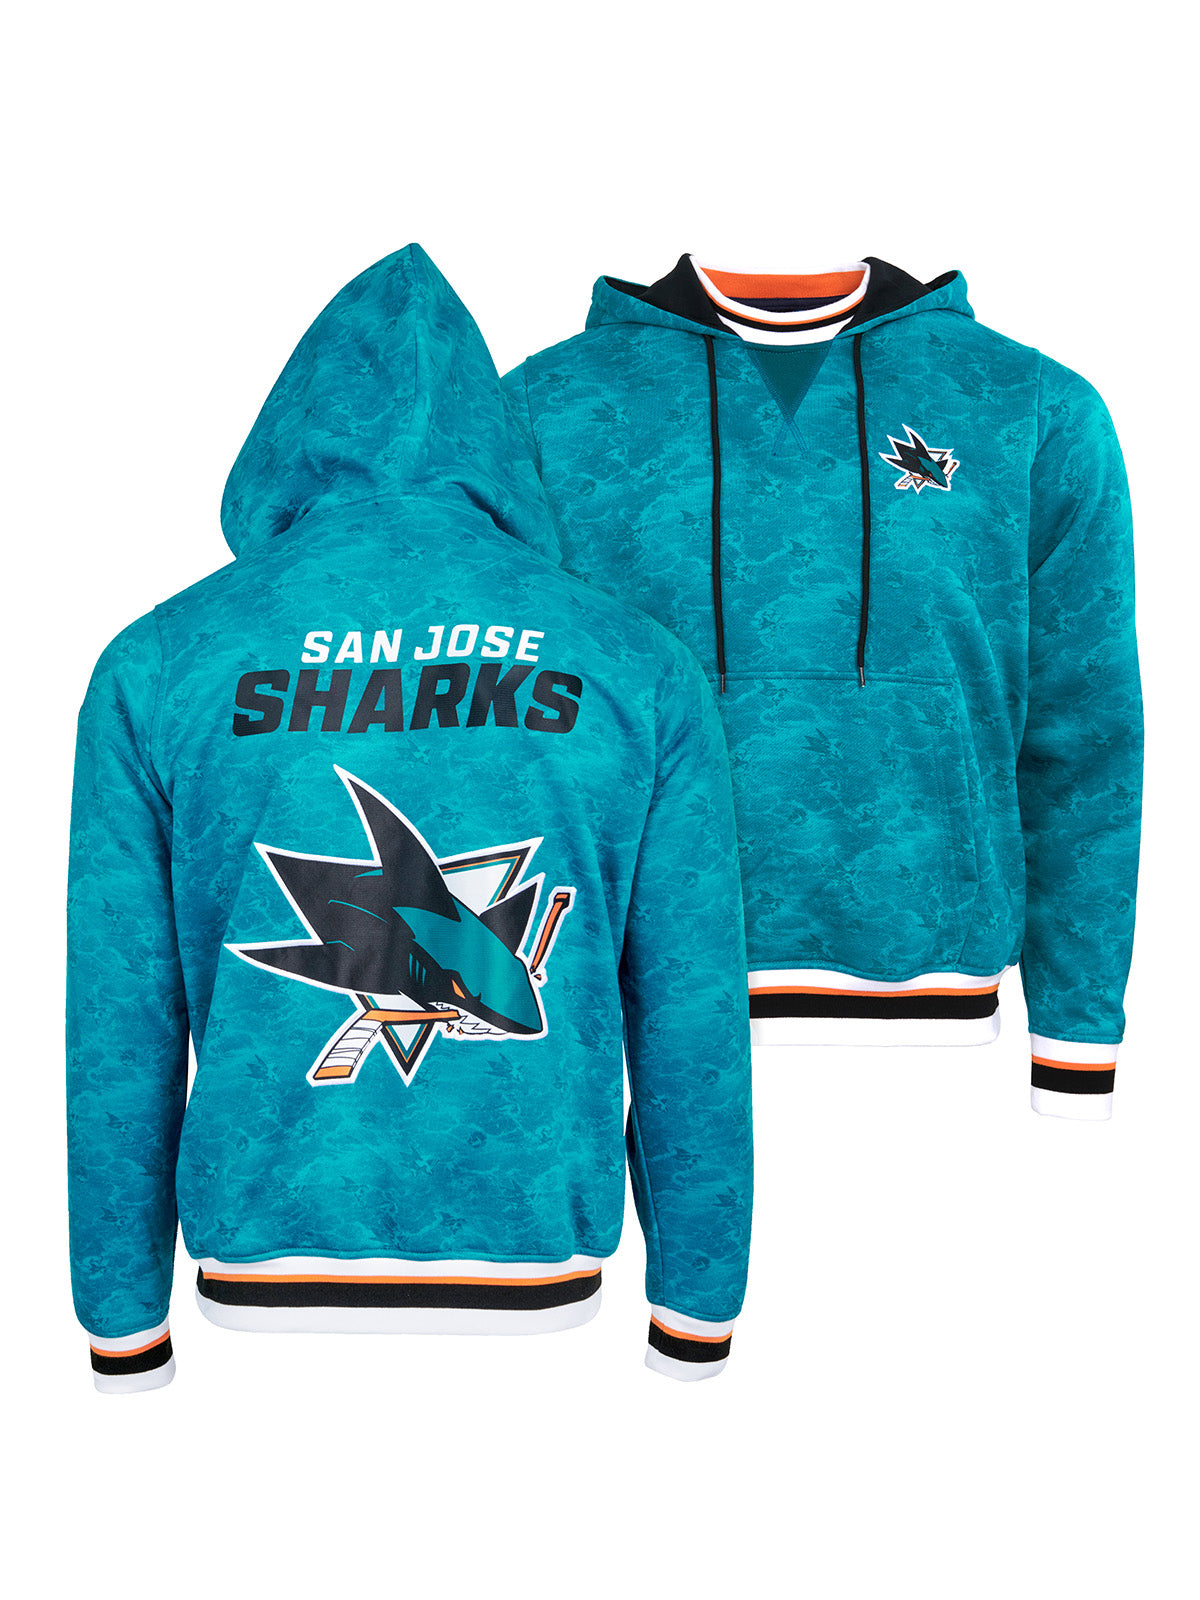 San Jose Sharks Hoodie - Show your team spirit, with the iconic team logo patch on the front and back, and proudly display your San Jose Sharks support in their team colors with this NHL hockey hoodie.